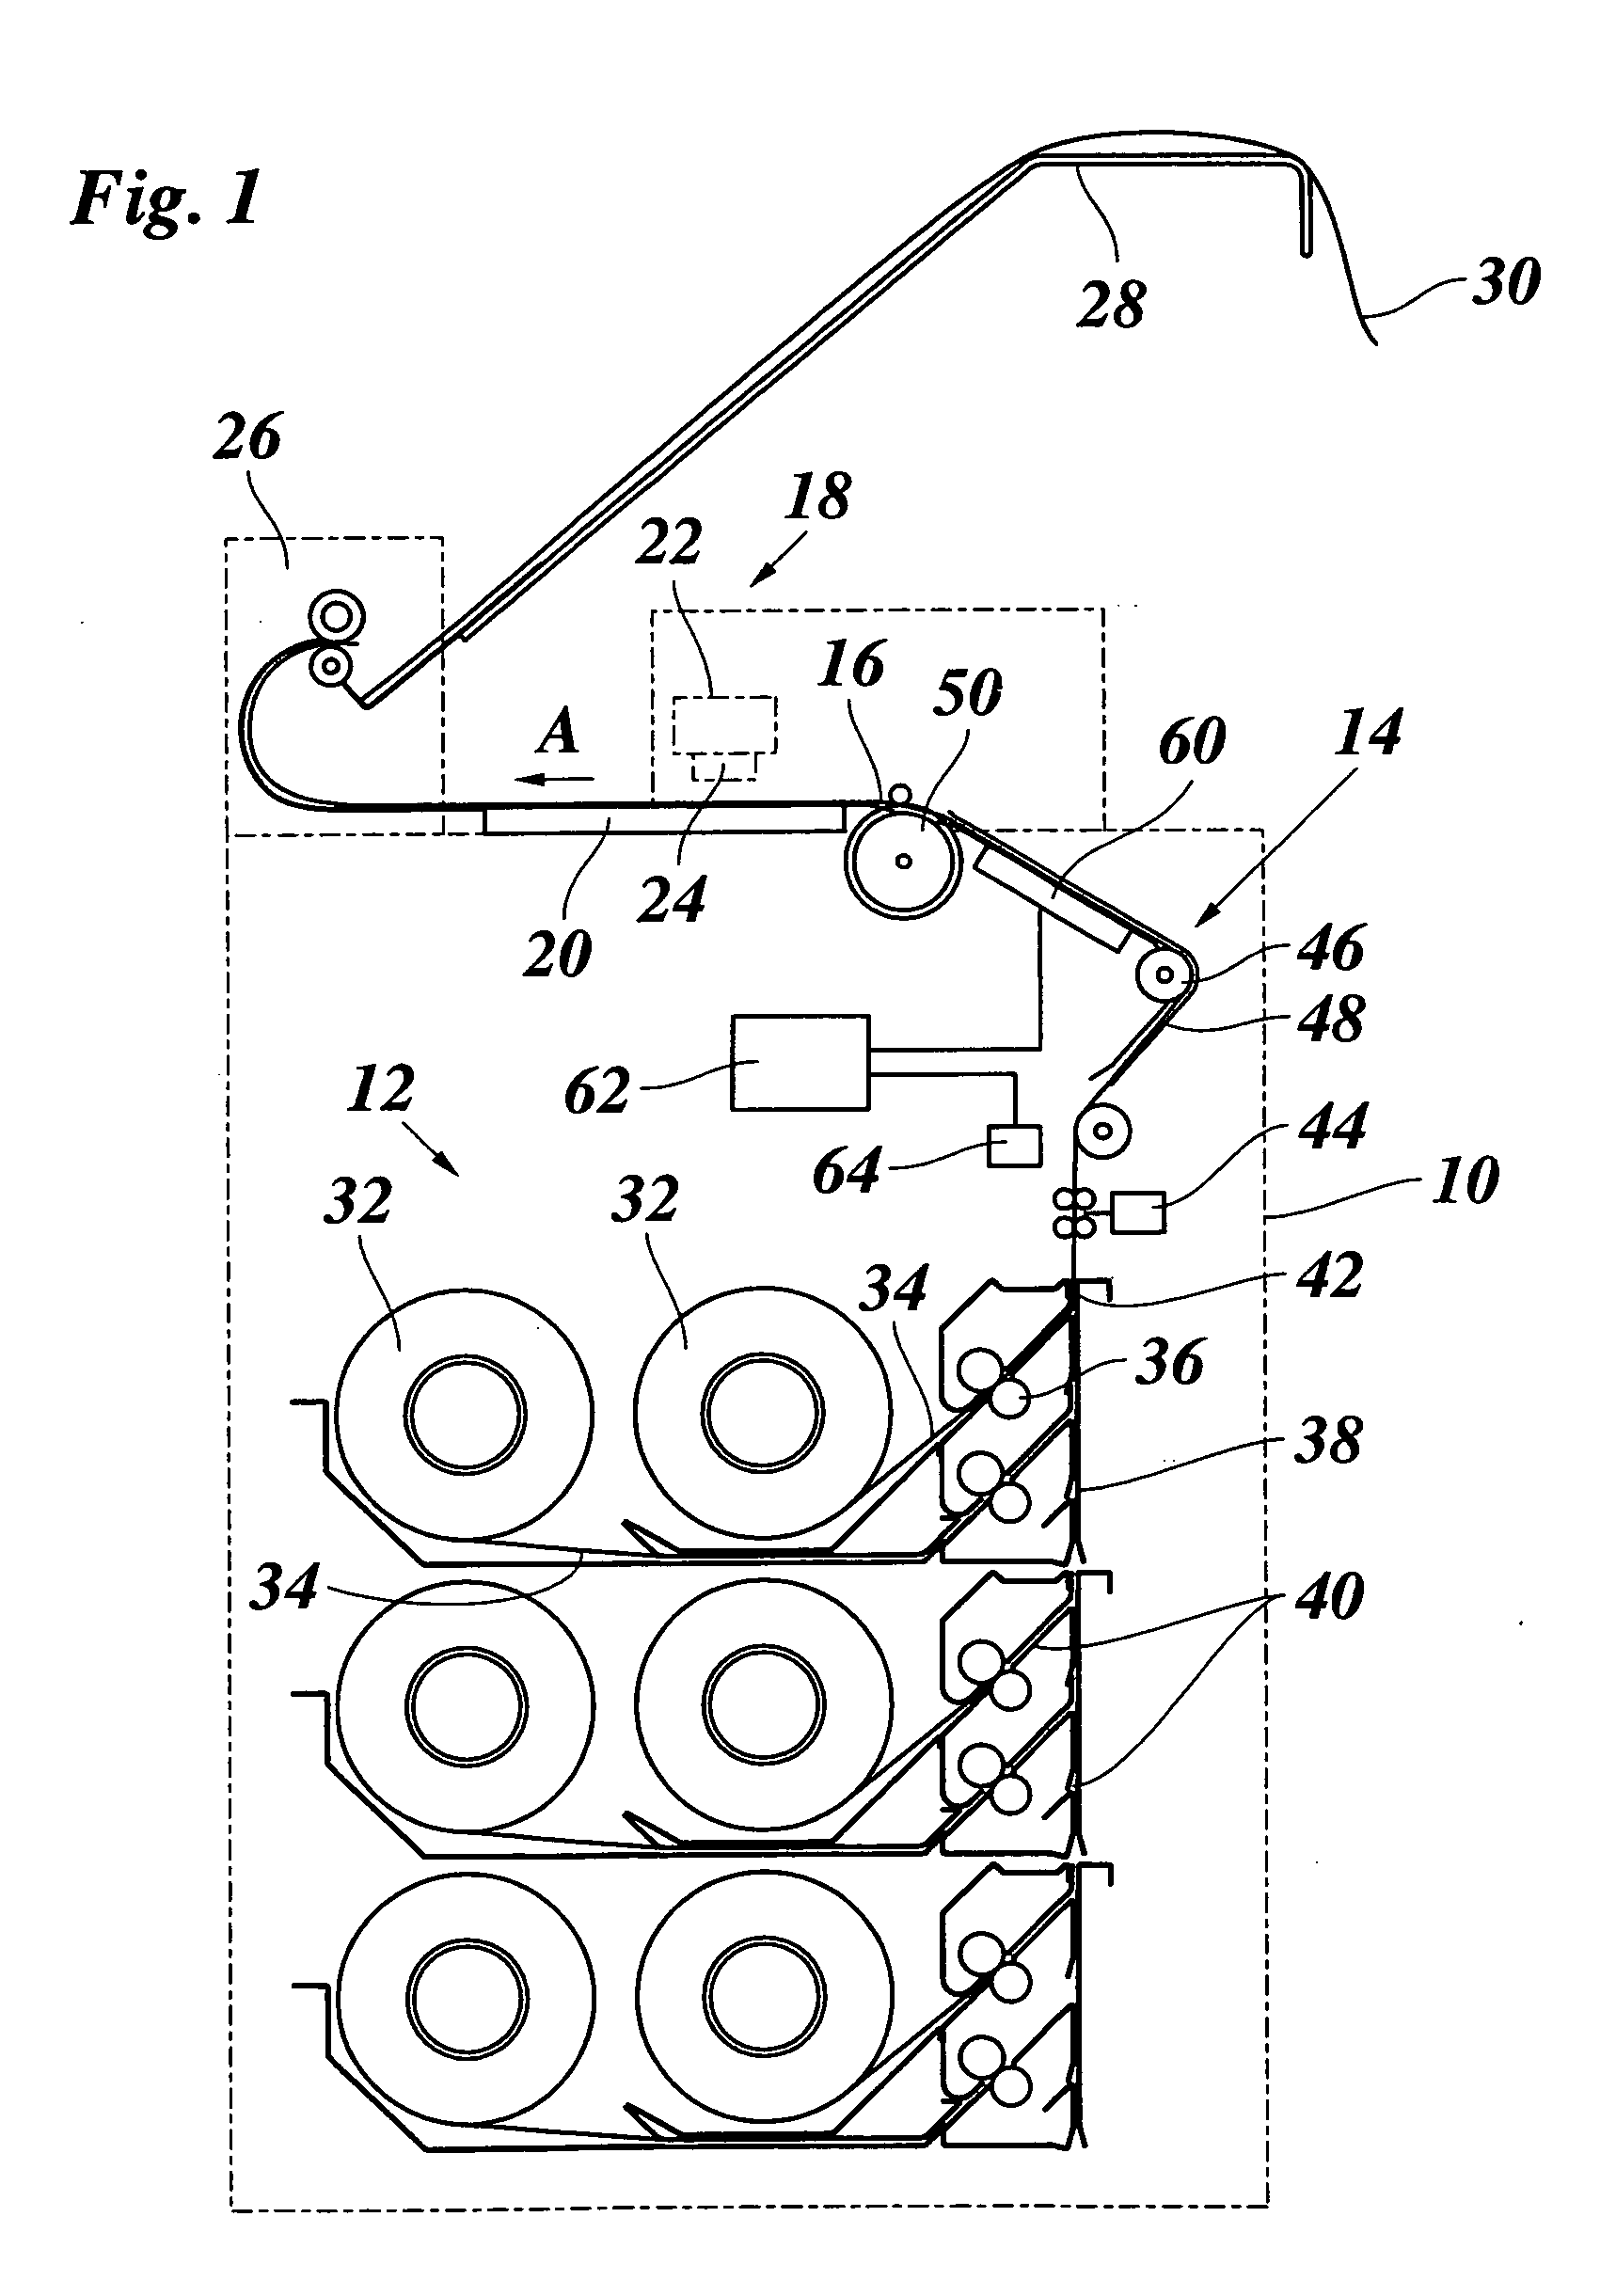 Method of treating image receiving sheets and a hot melt ink jet printer employing this method